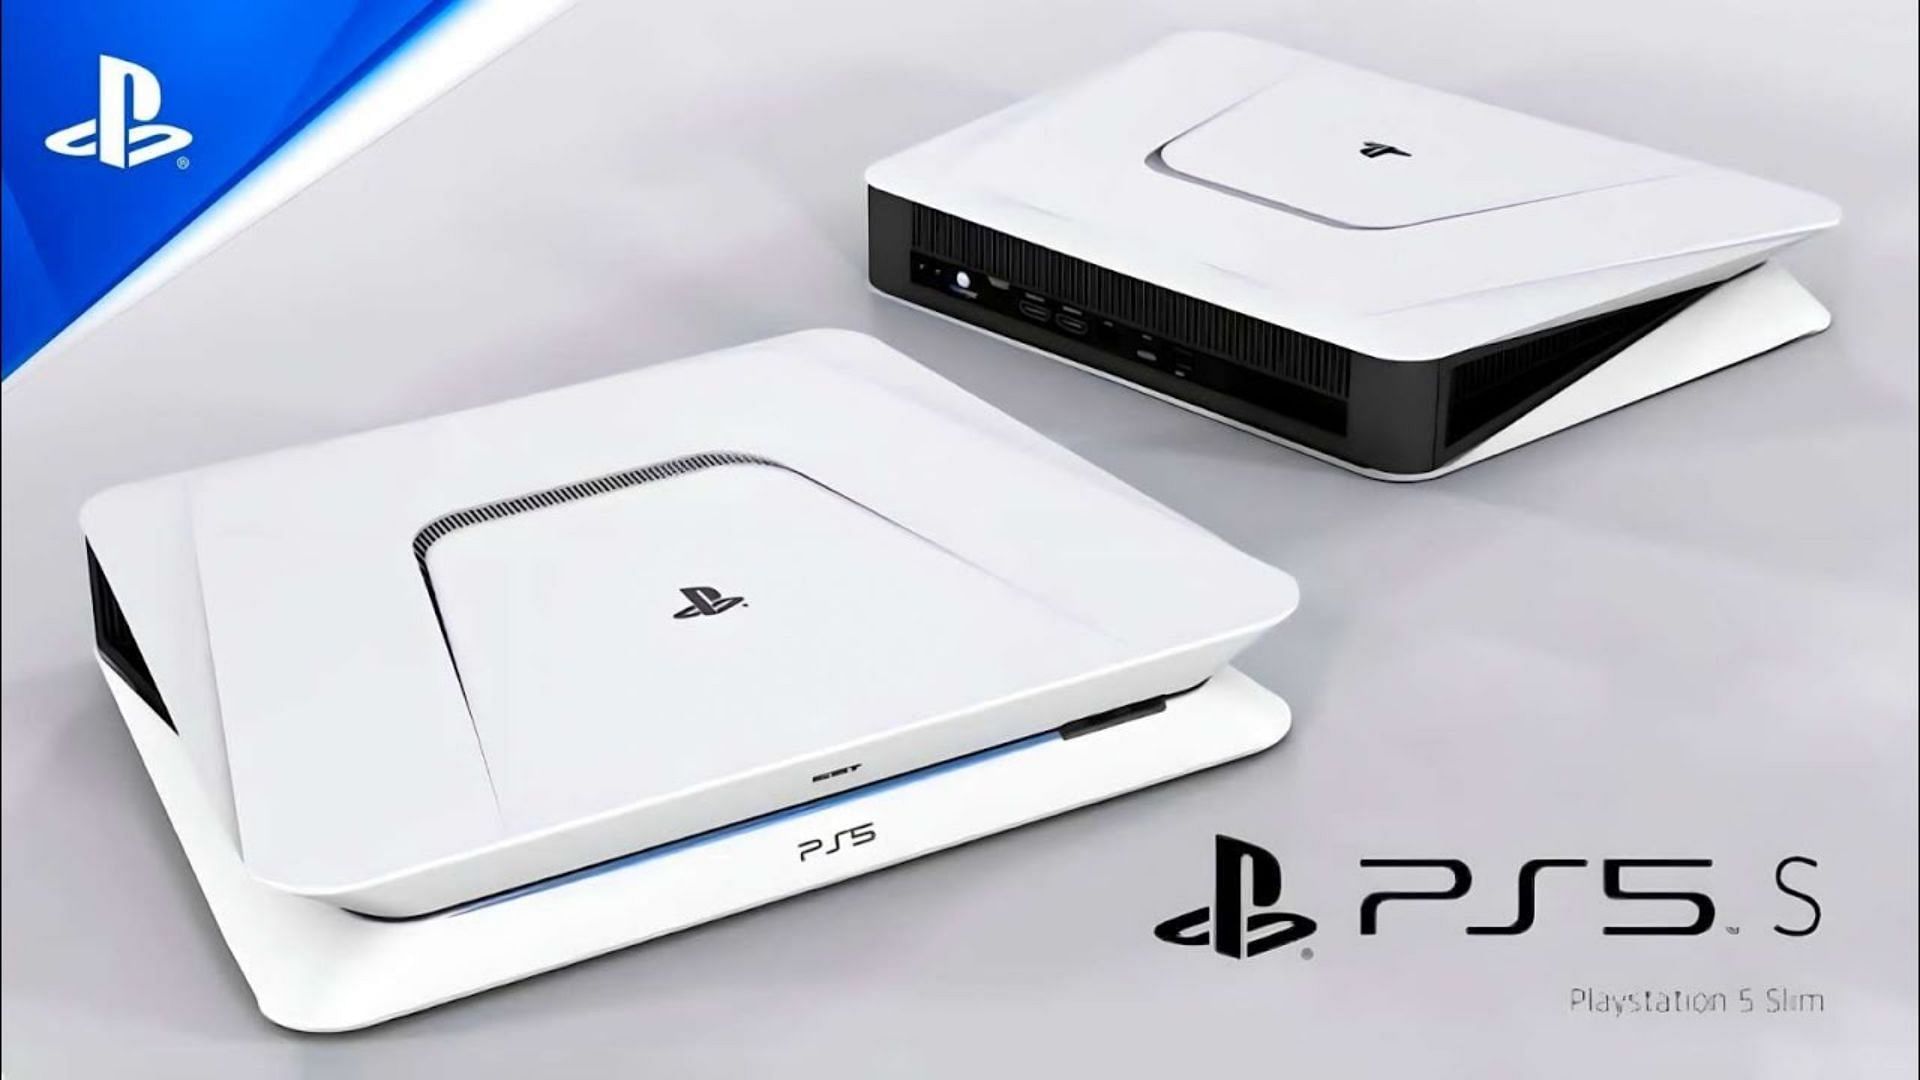 PS5 vs PS5 Slim: specs, size, differences and price